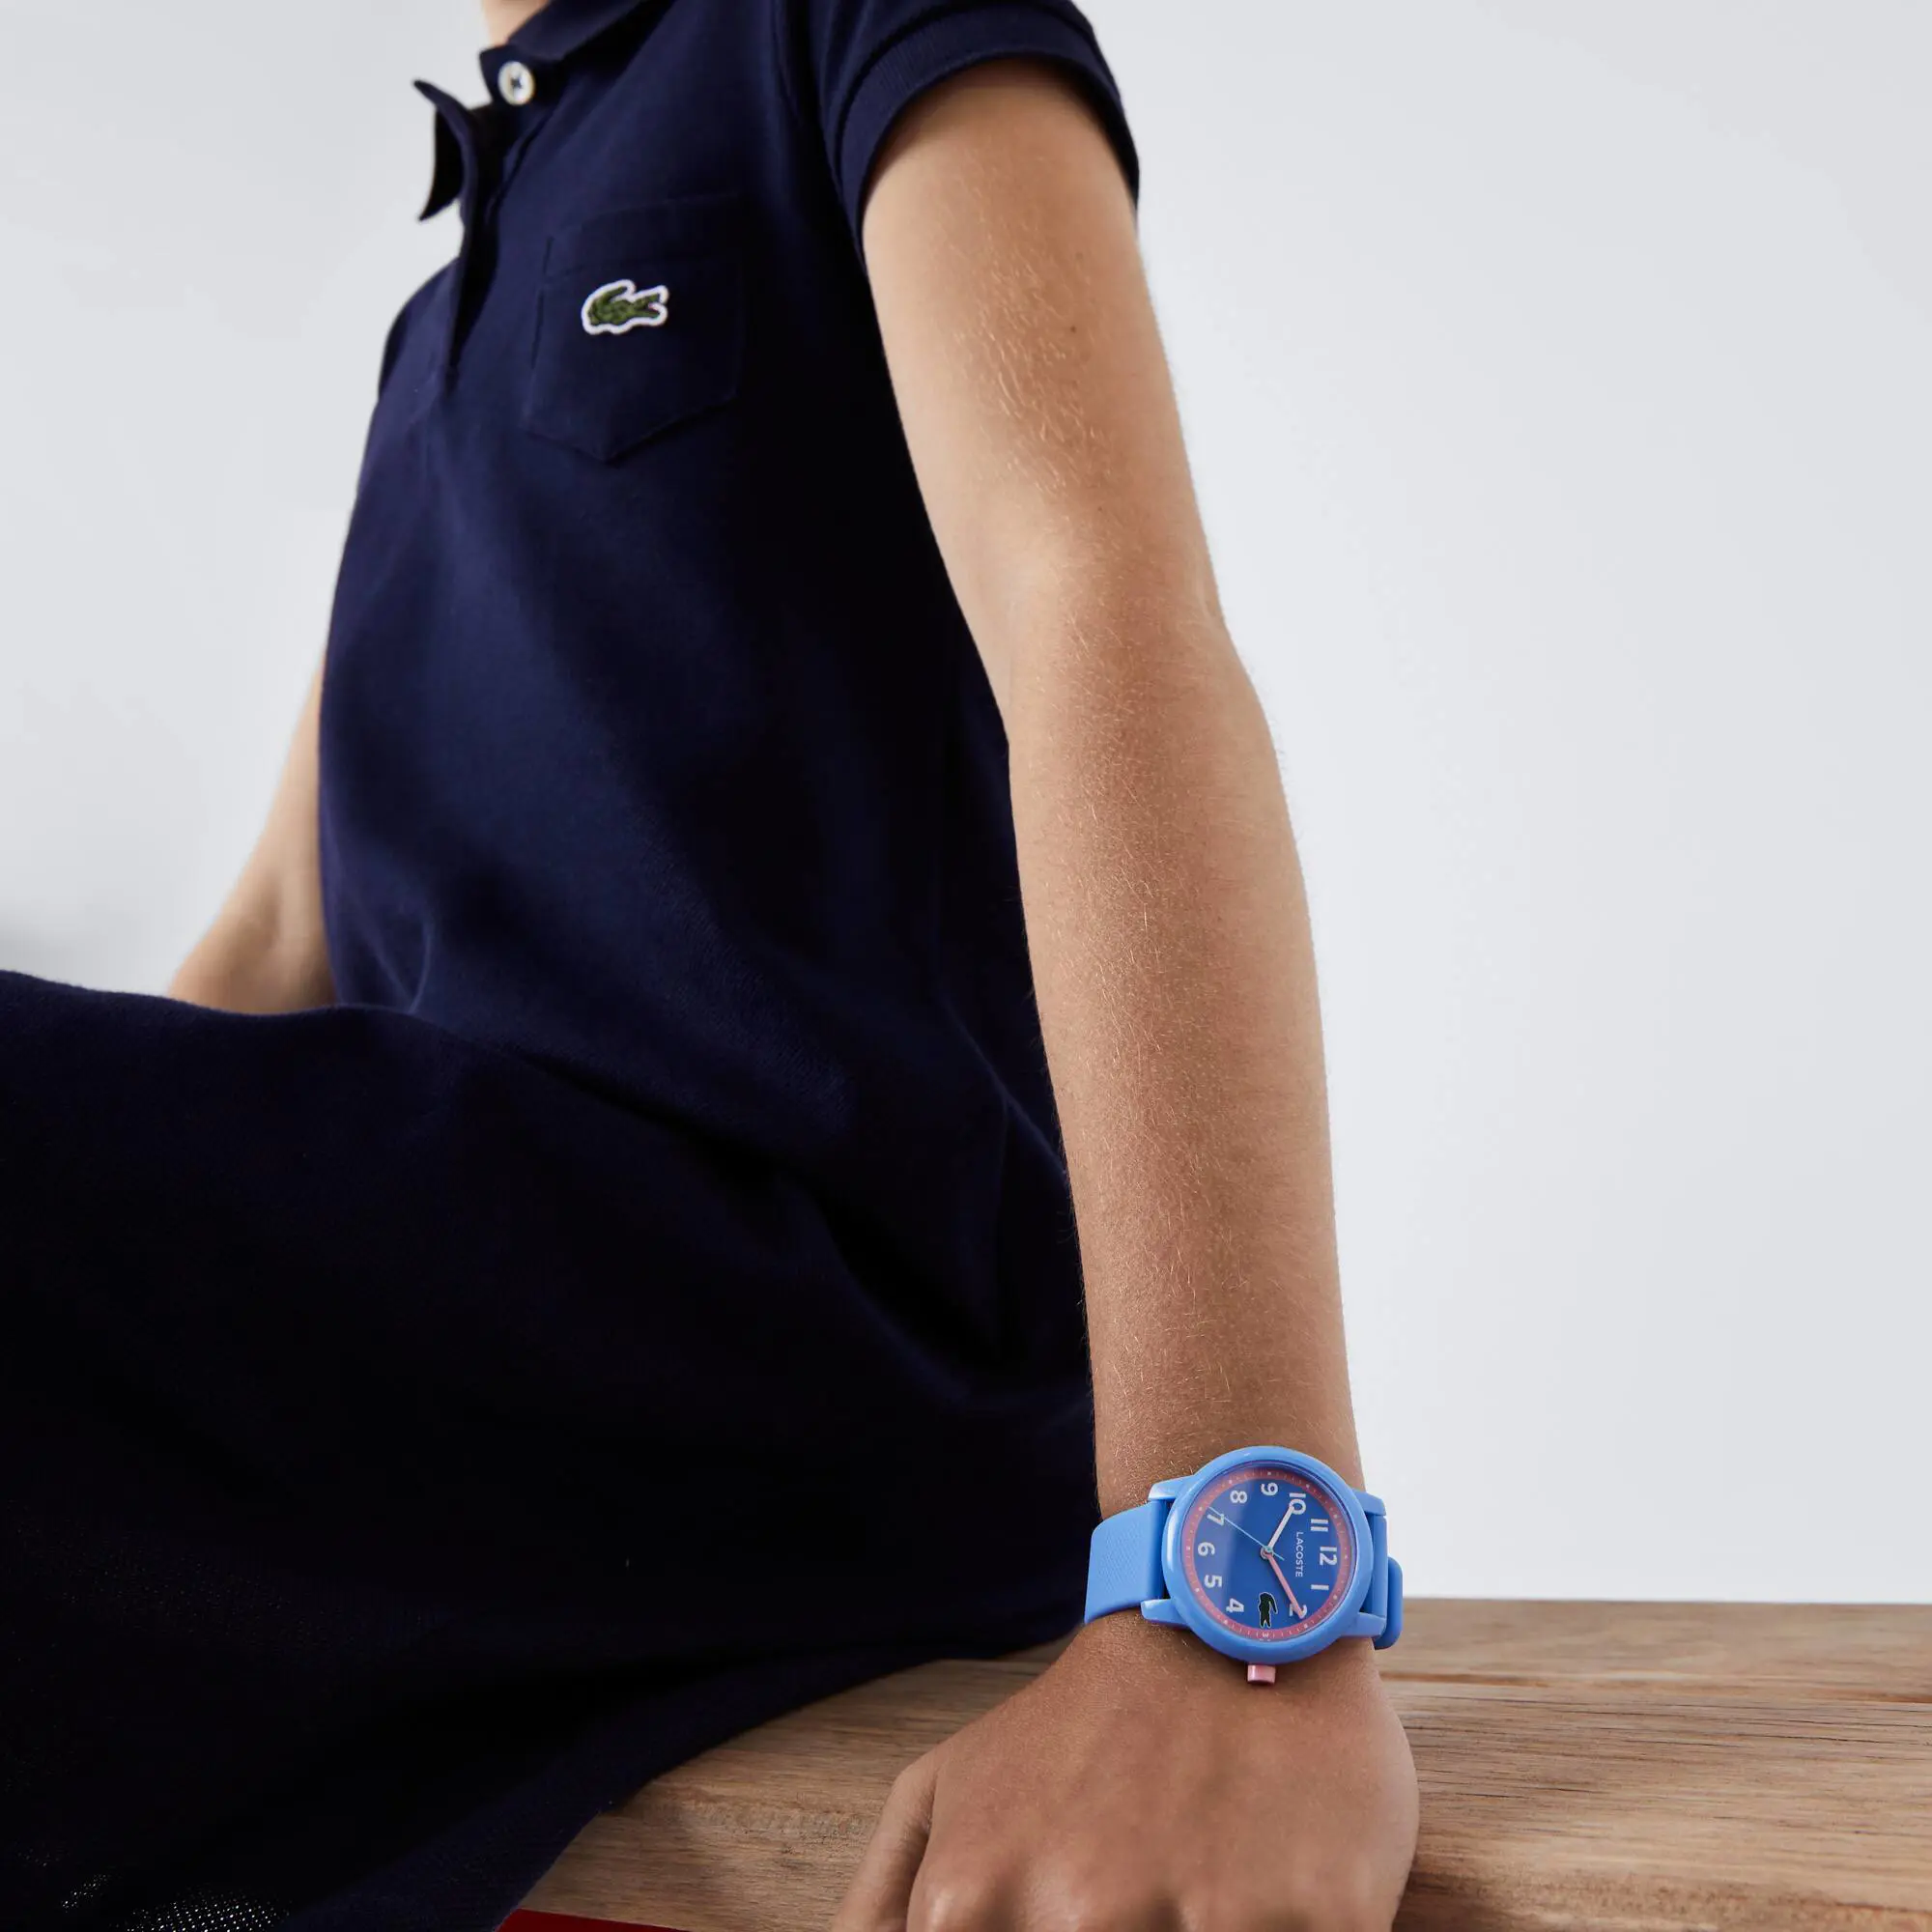 Lacoste Kids’ Lacoste.12.12 Blue Silicone Strap Watch. 1